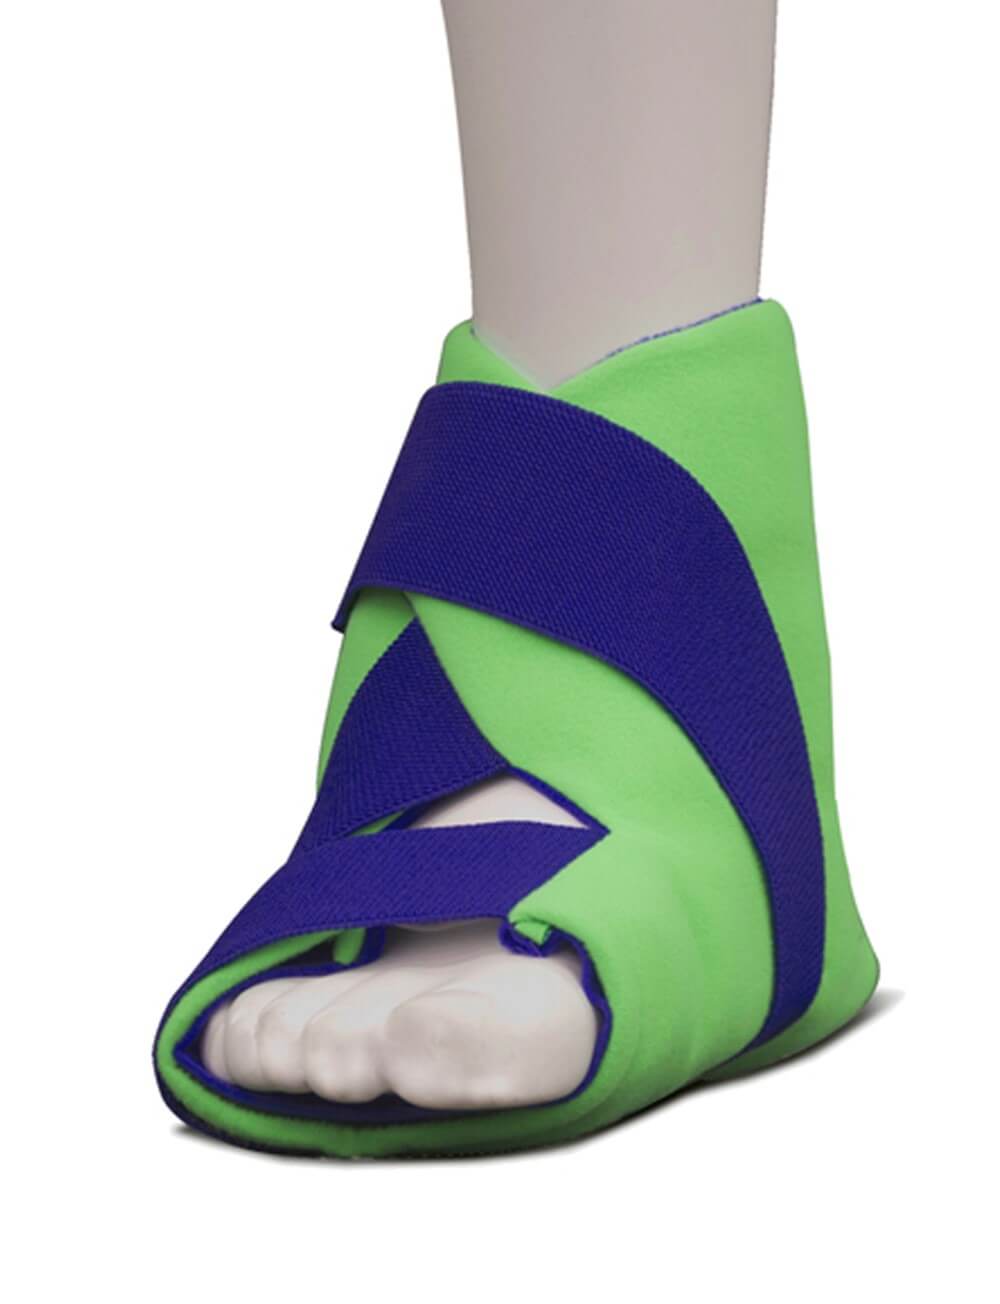 foot ankle ice pack ankle swelling strain injury